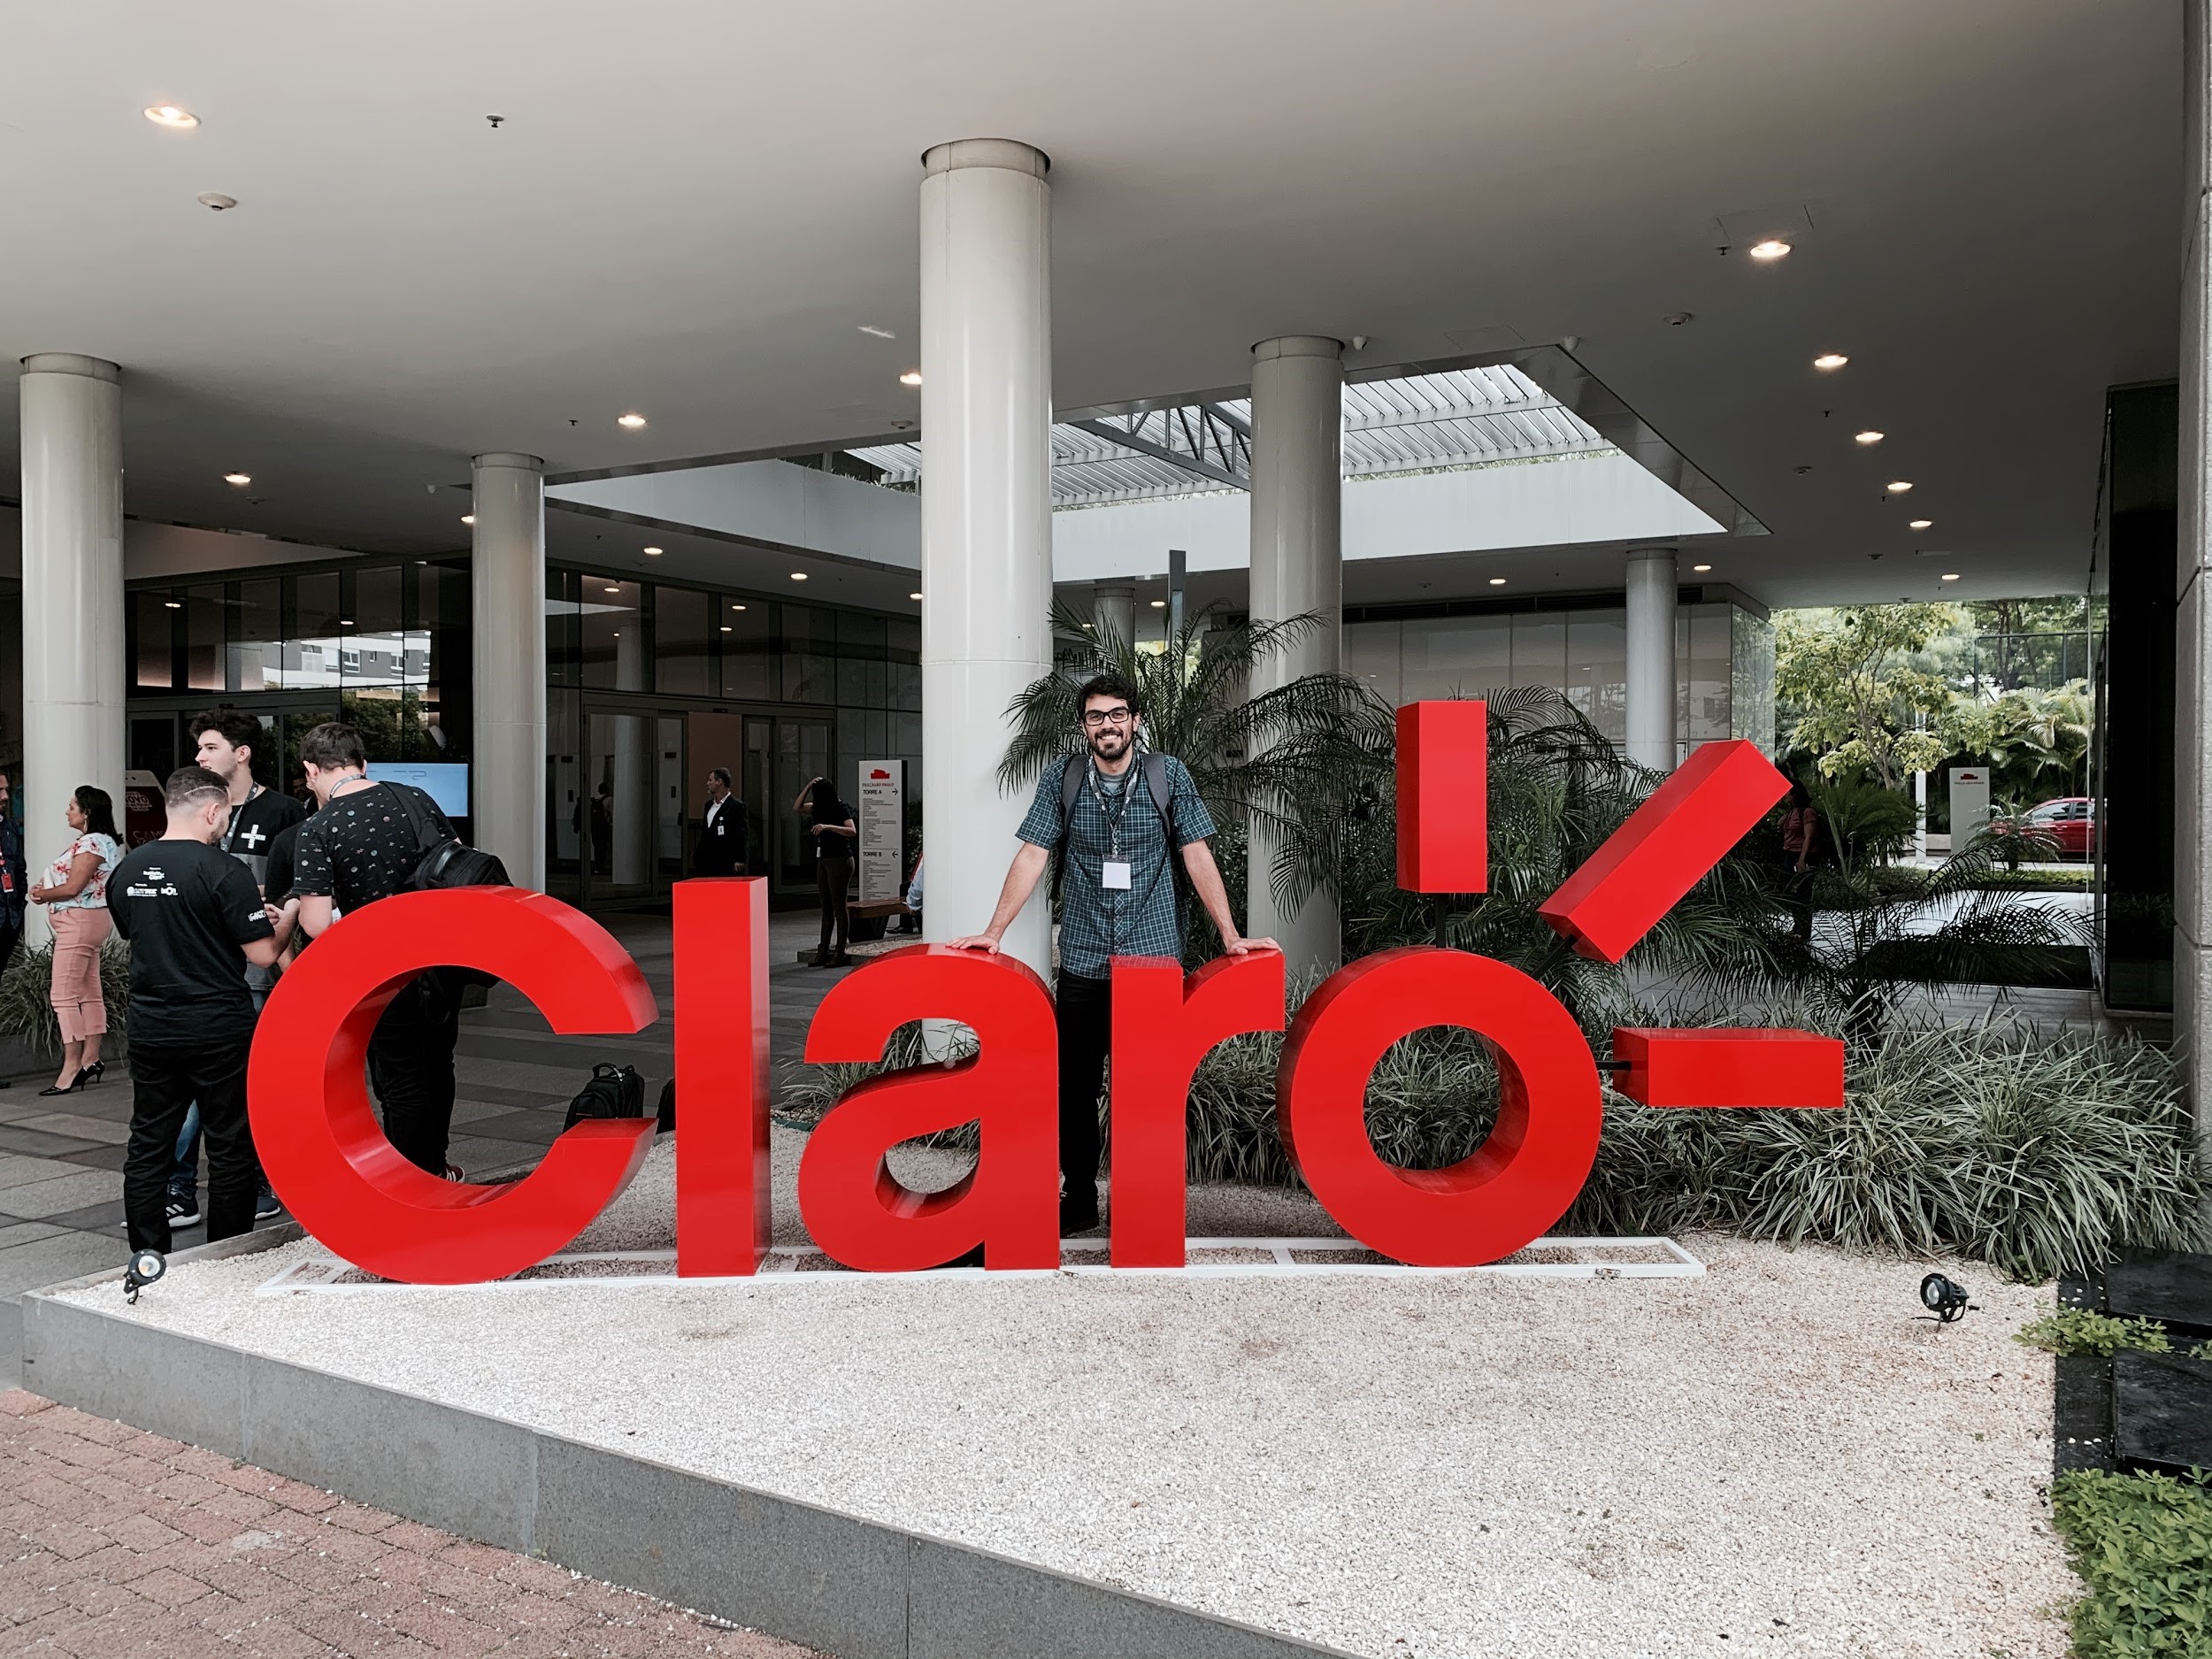  Claro offers best cell phone experience in Brazil